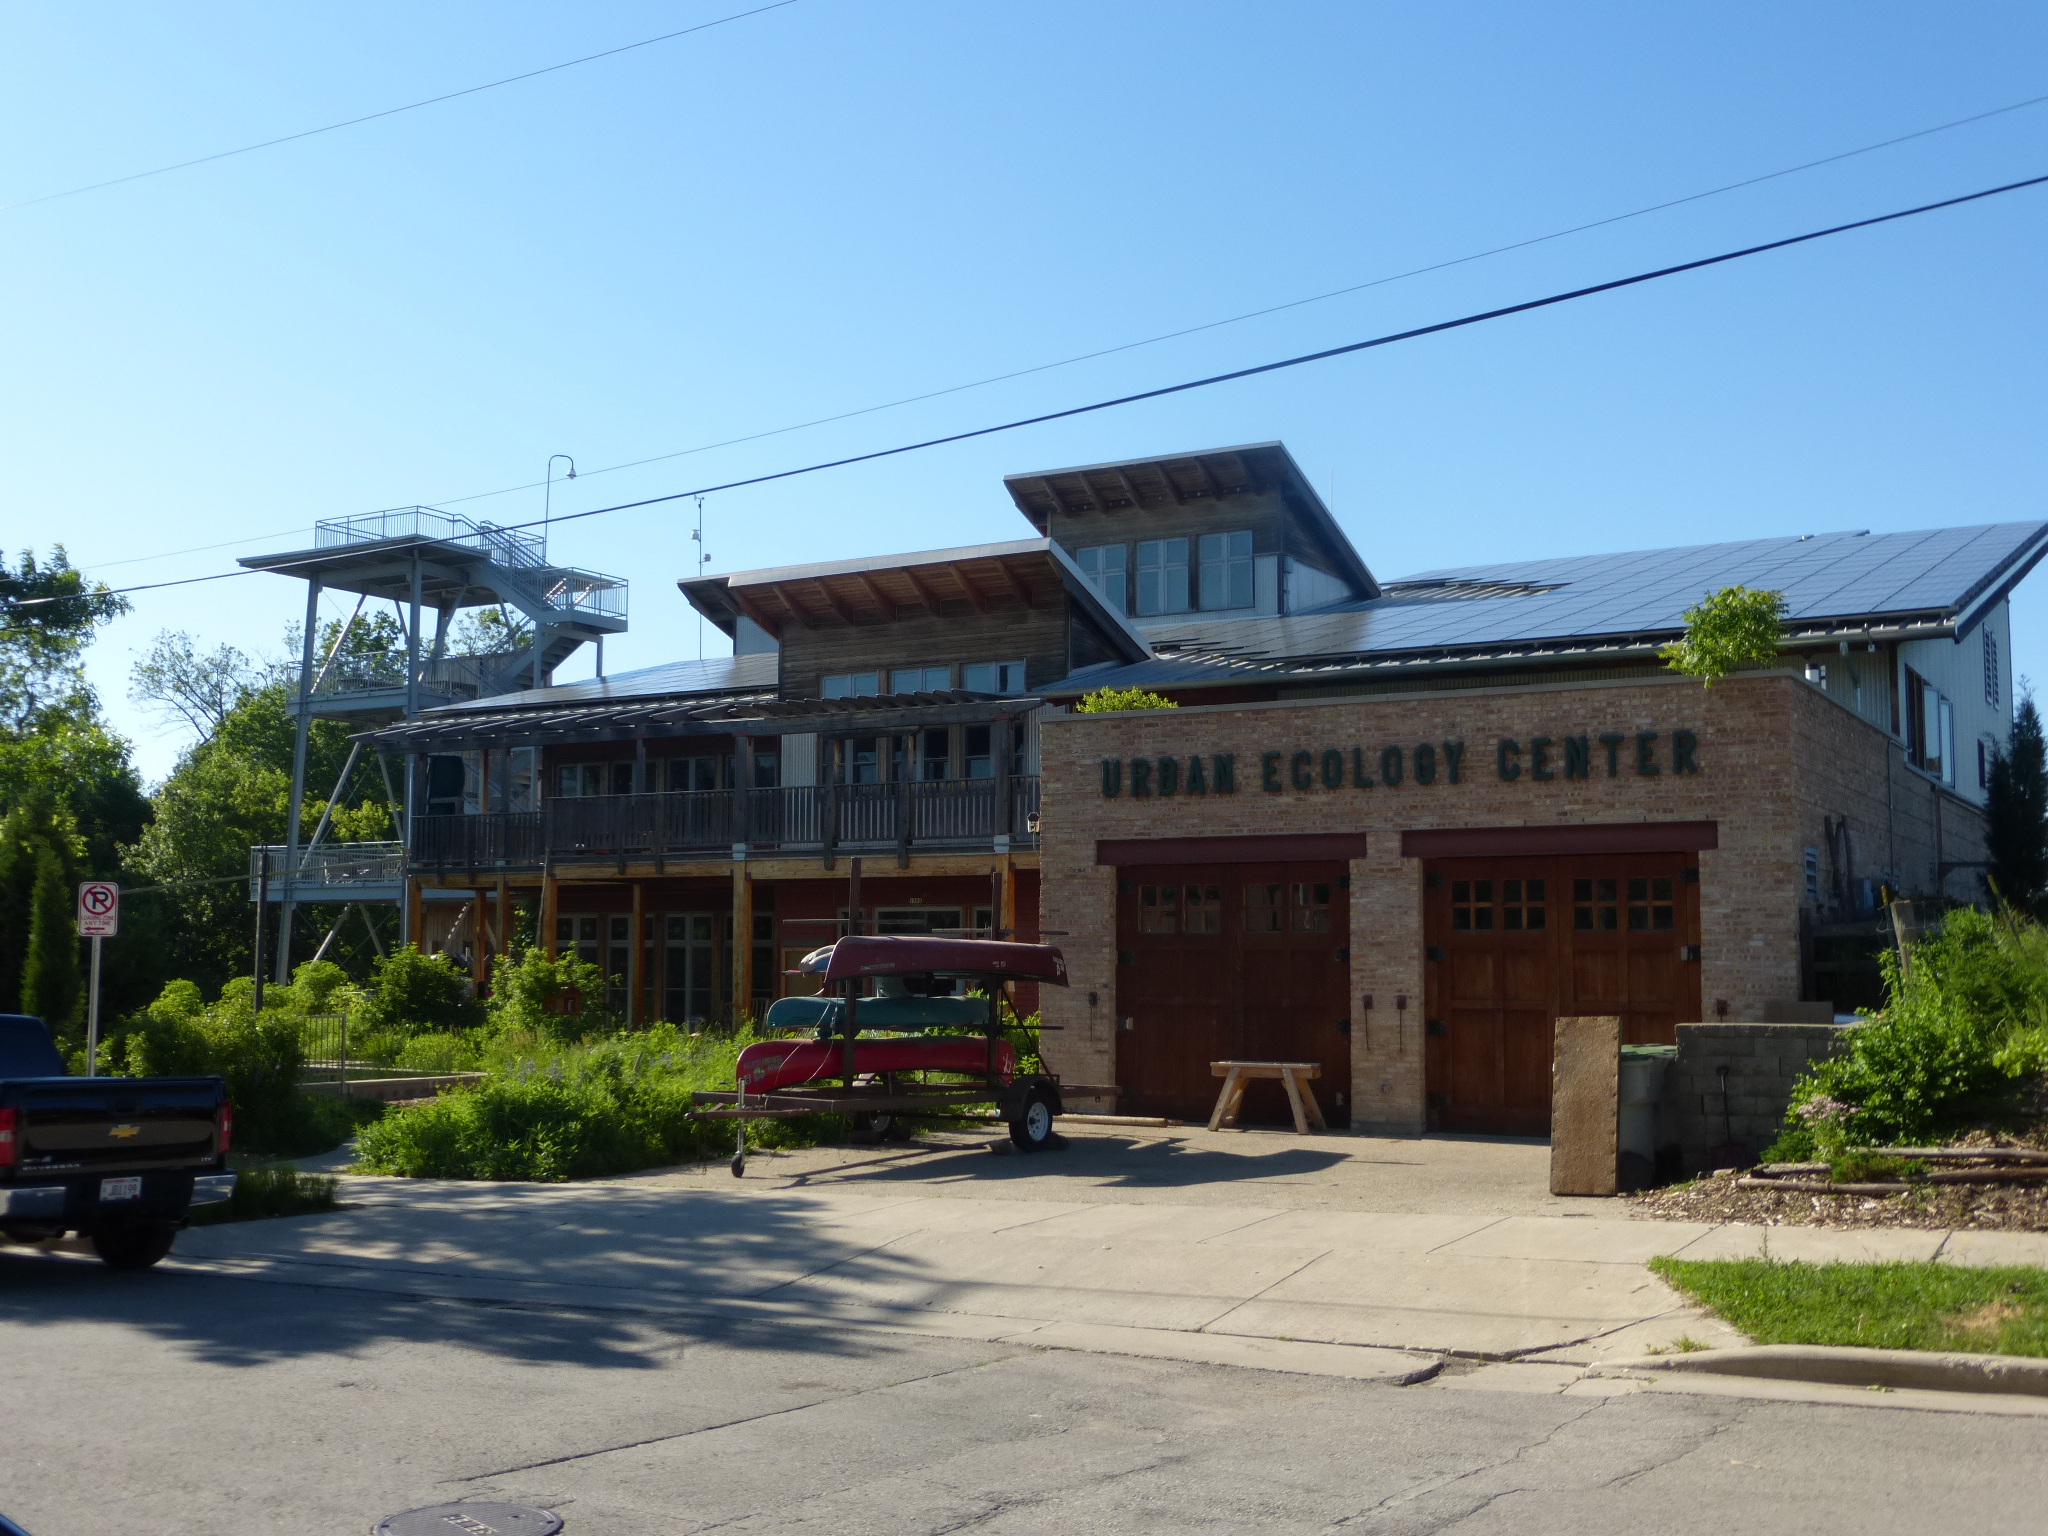 On the Evolution of “Community Ecology Centers”